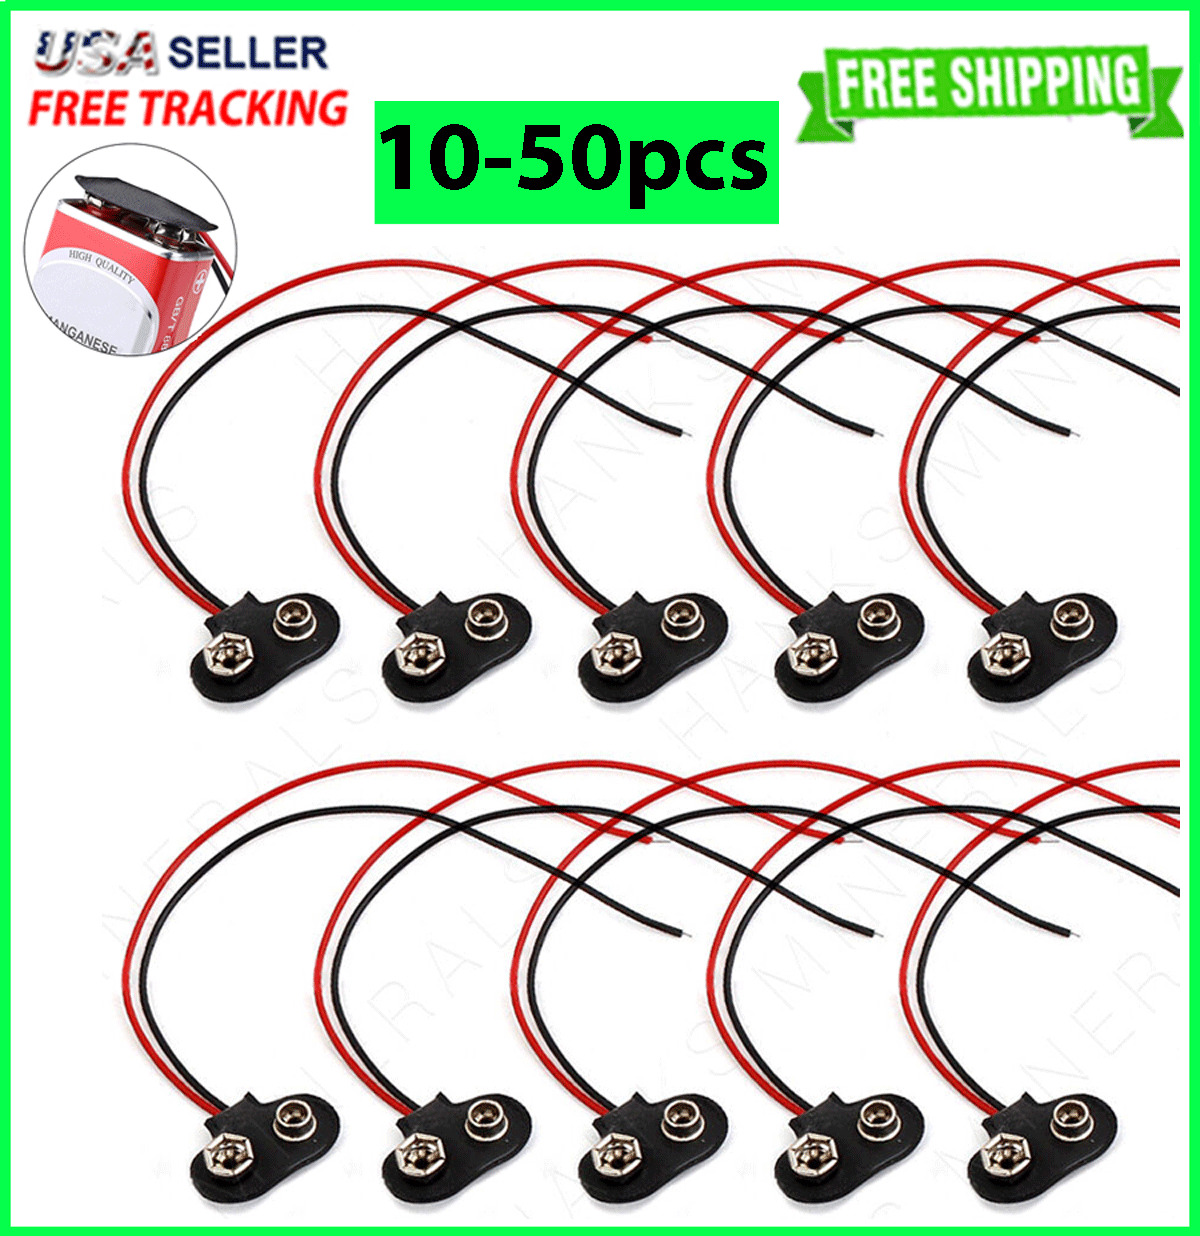 9V Volt Battery Connector T Type Clip Plug Wire Cord Leads 9 Snap On 6